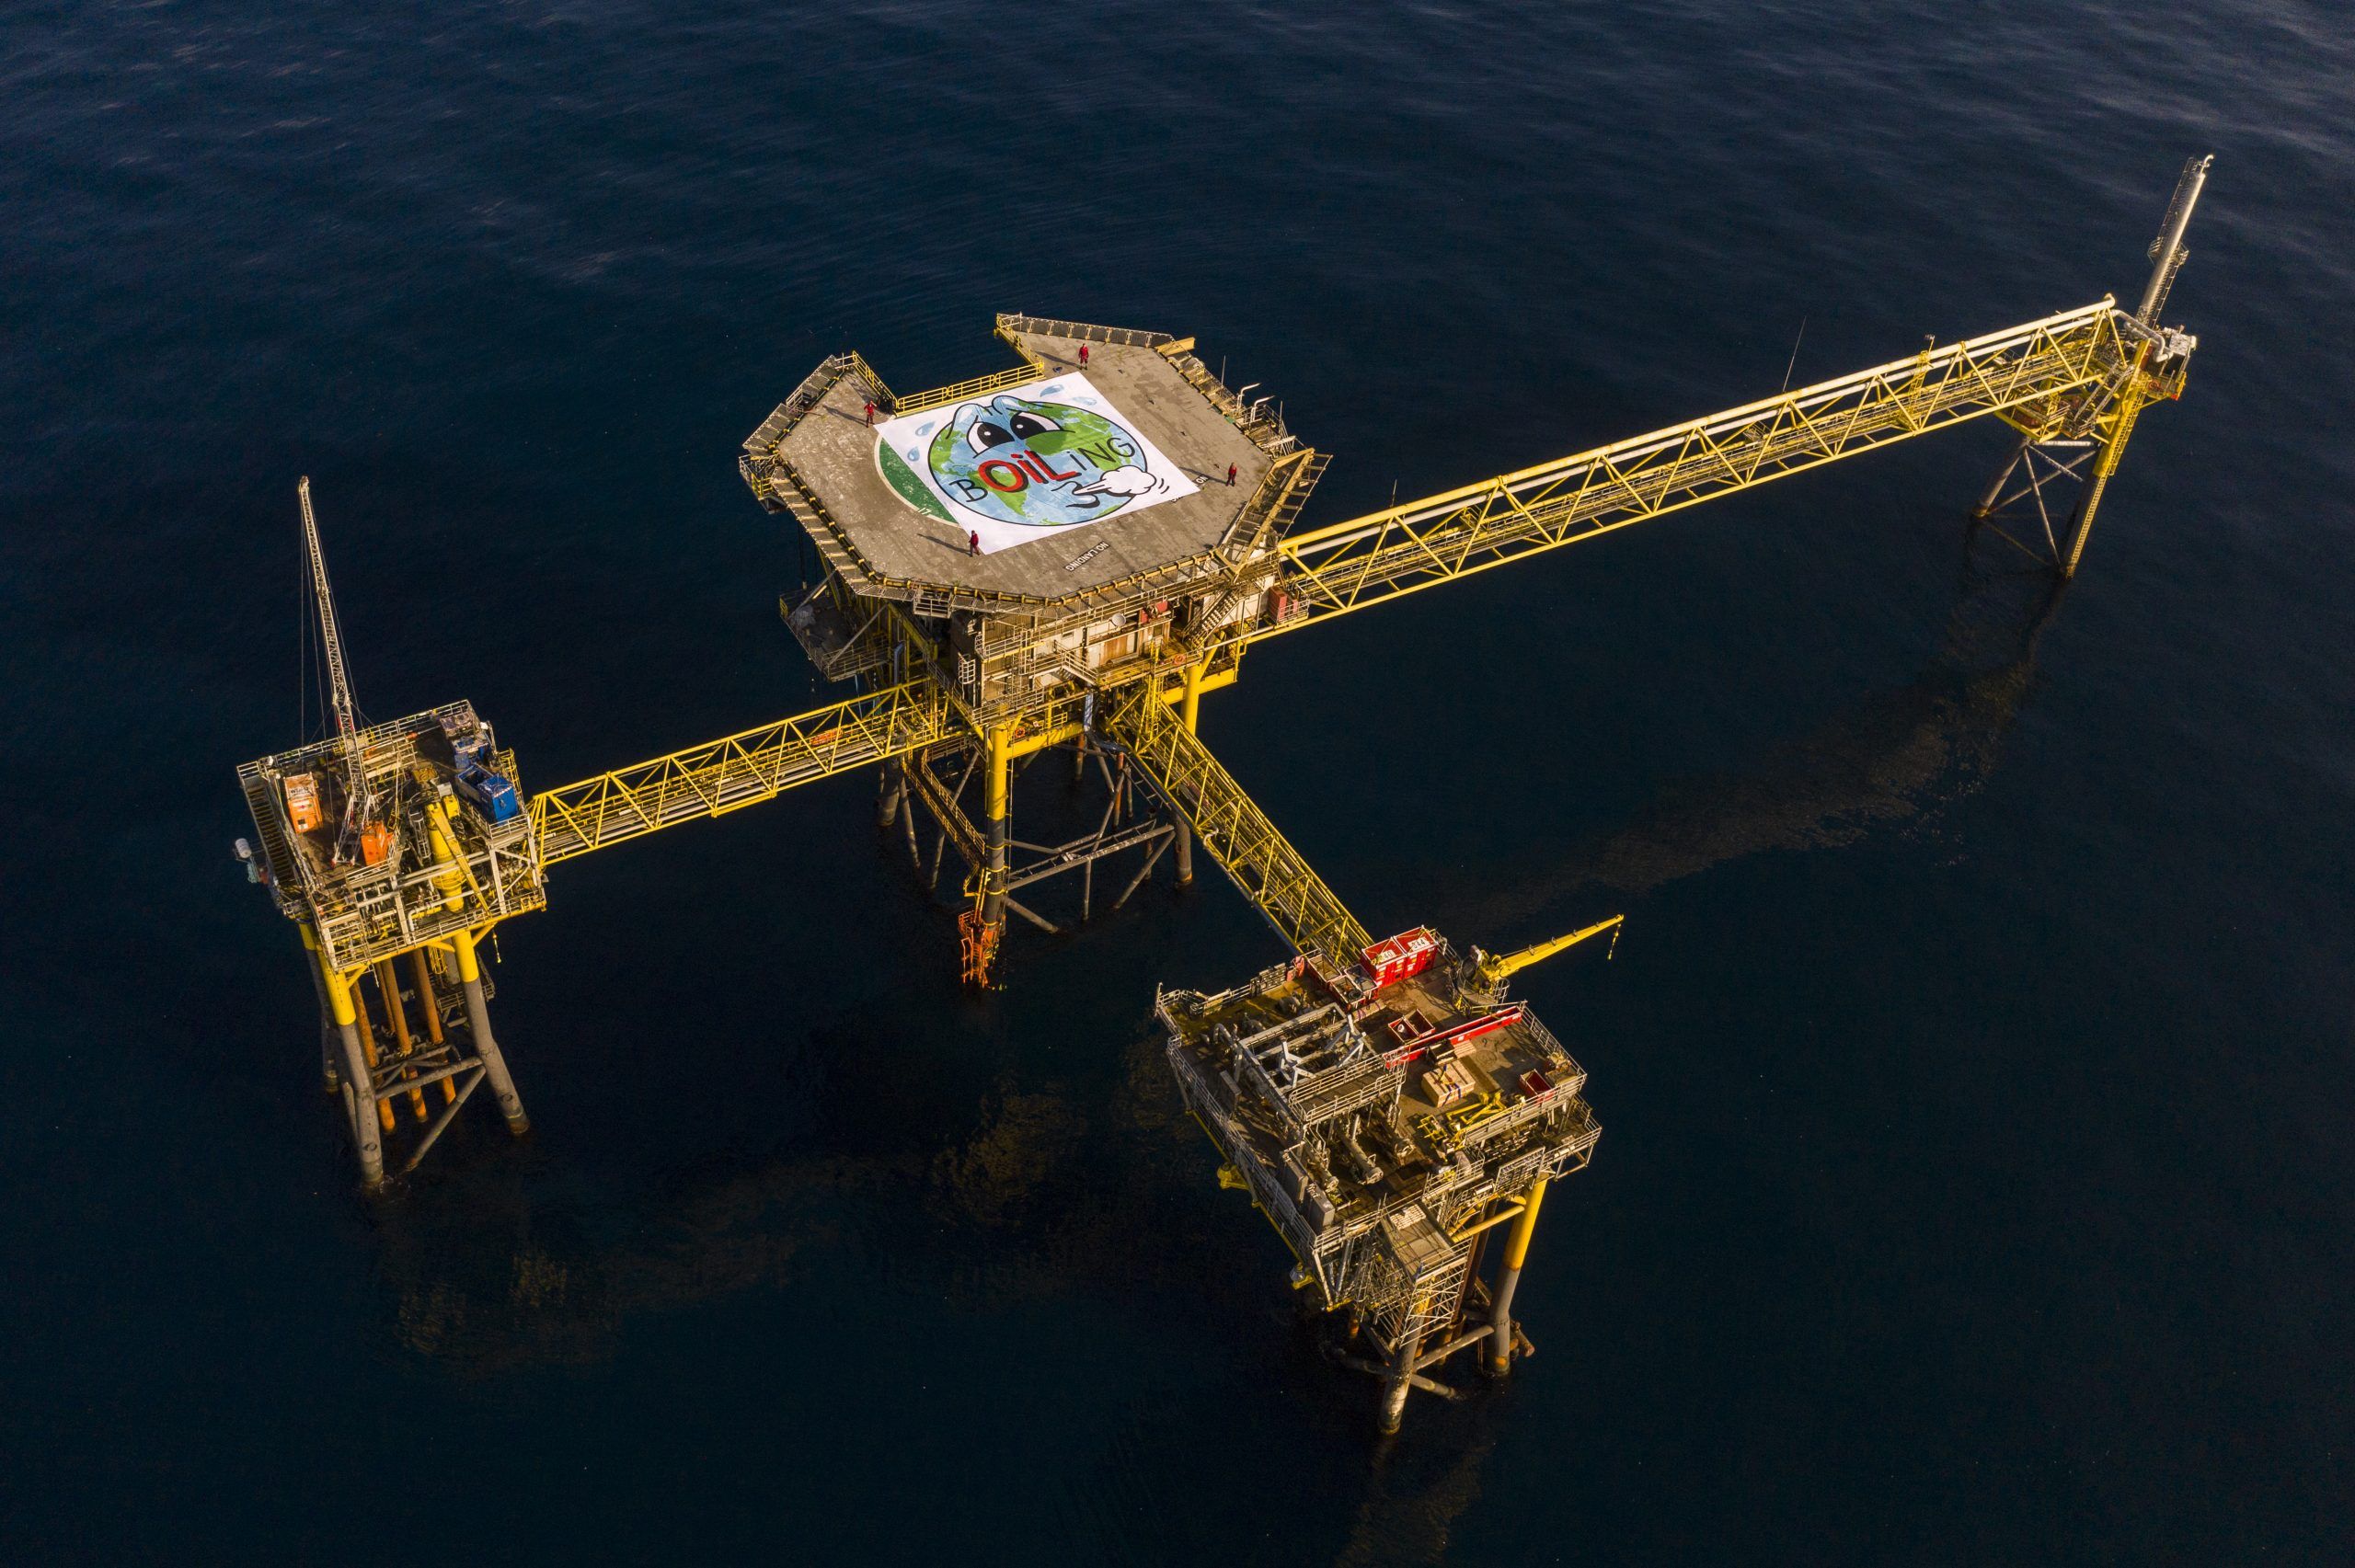 Business Round-Up: Greenpeace takes over North Sea platform to protest against Danish oil production